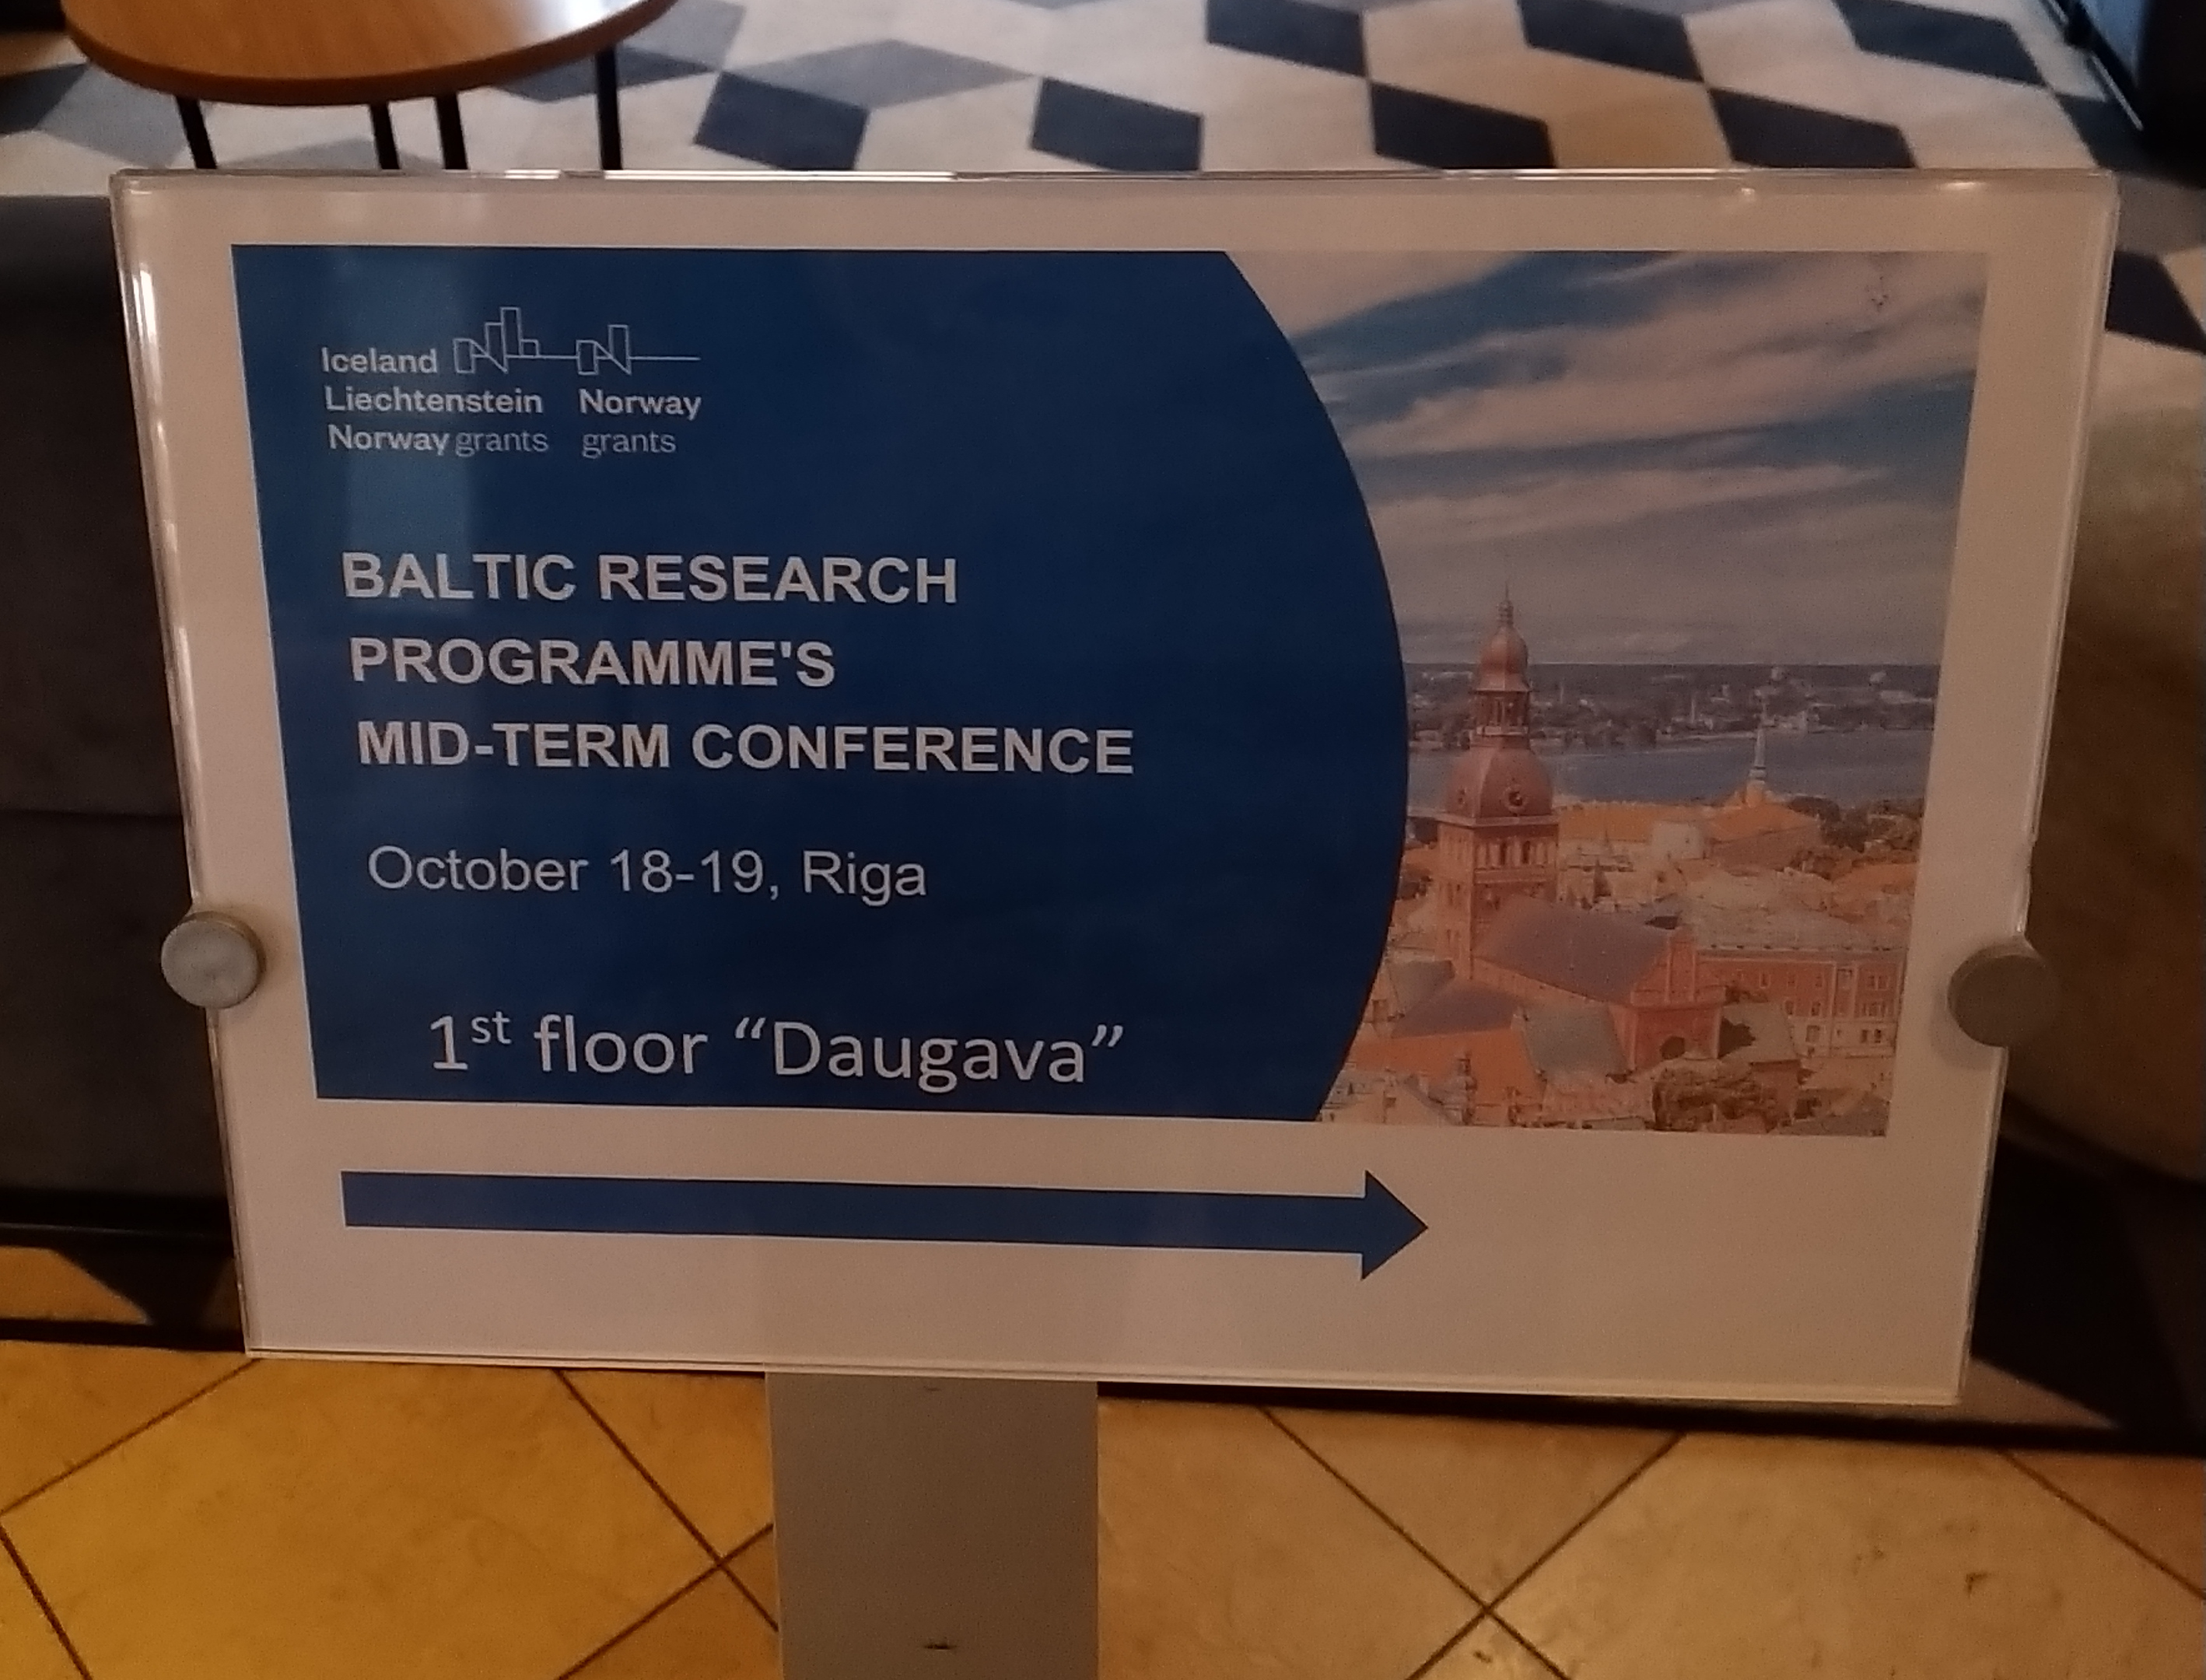 Presentation of the ADVANCES project at the Baltic Research Programme’s Mid-Term Conference